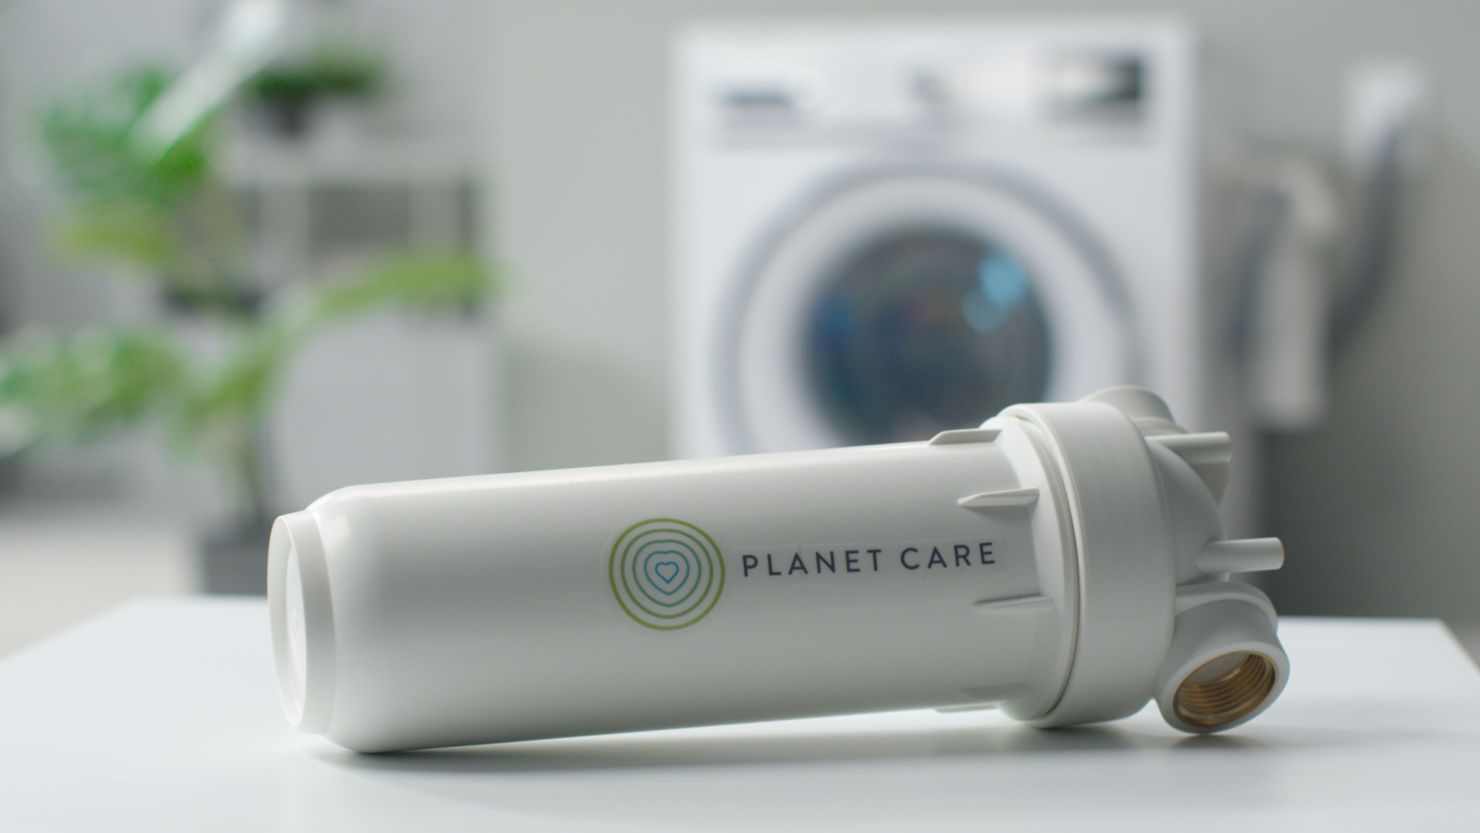 PlanetCare makes a washing machine filter to help keep microfibers from entering the environment.